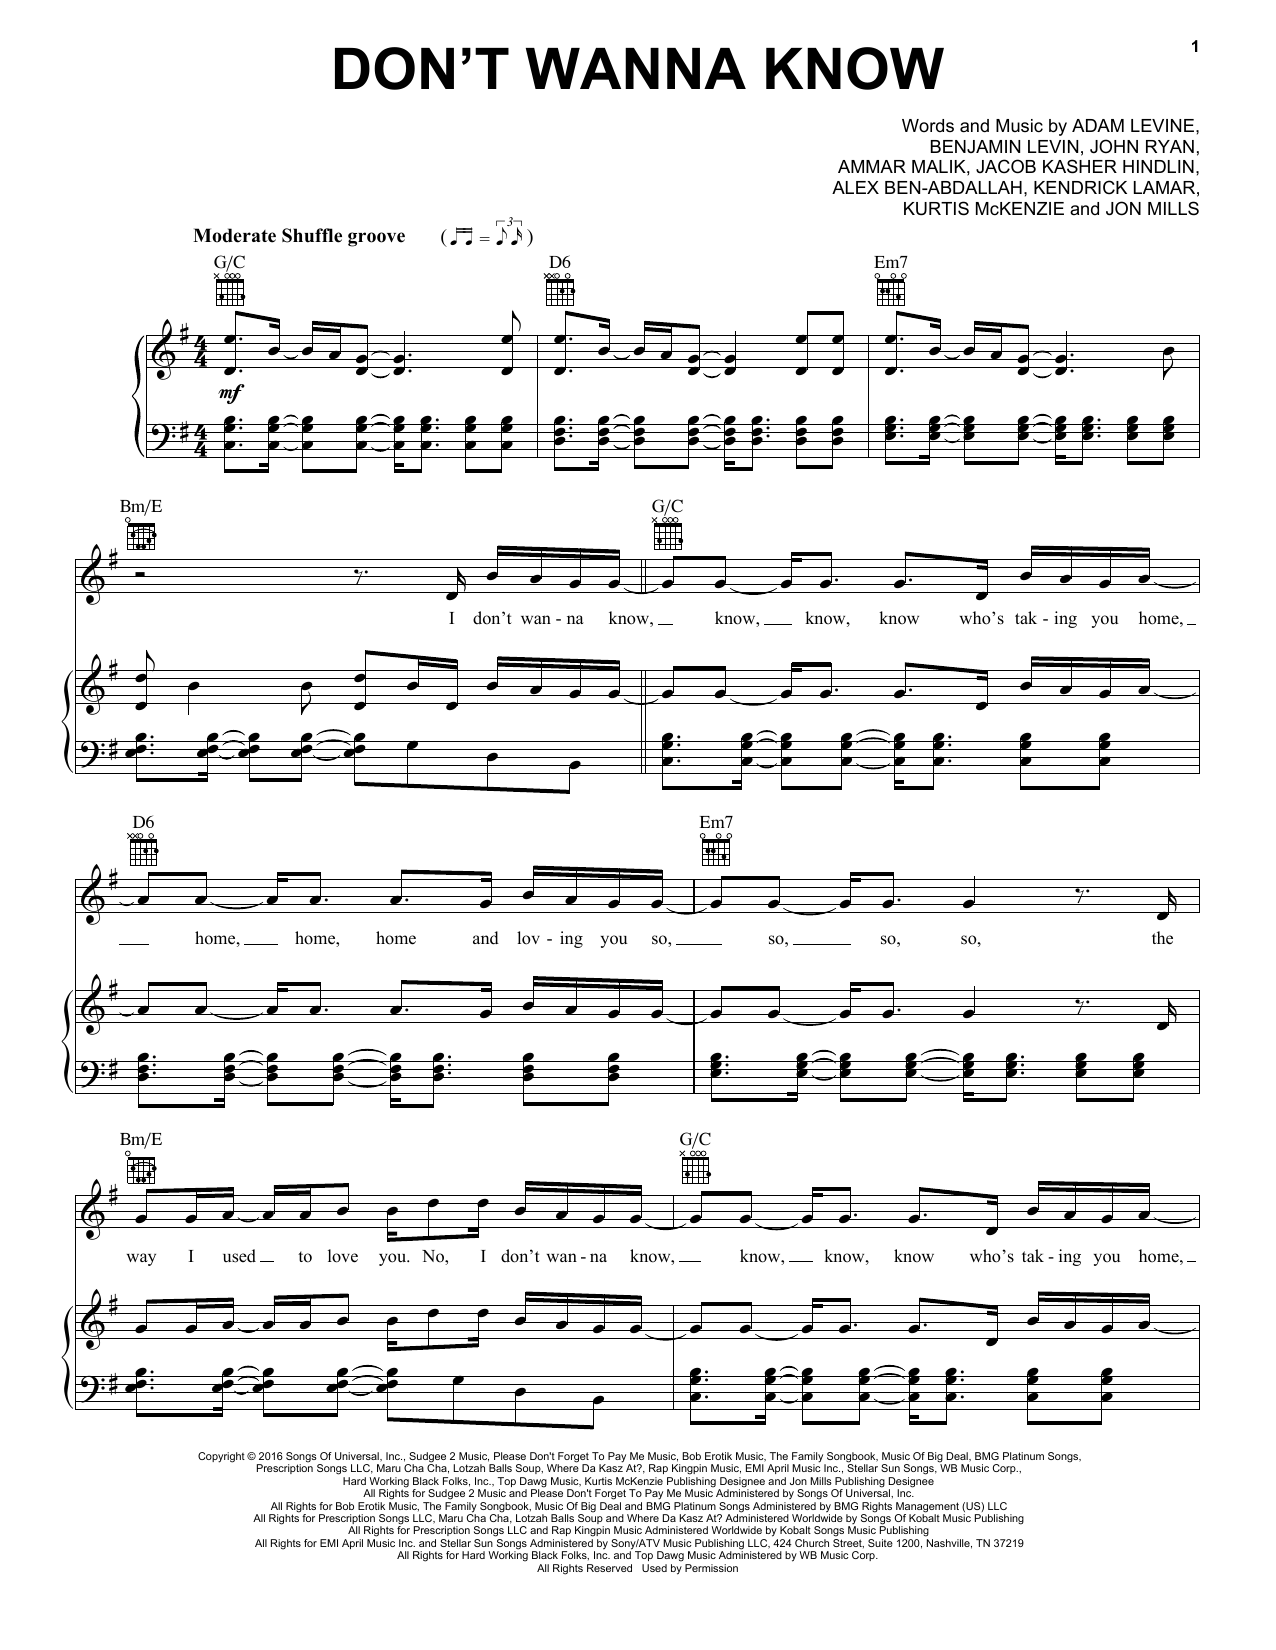 Maroon 5 "Don't Wanna Know" Sheet Music Notes, Chords | Piano, Vocal